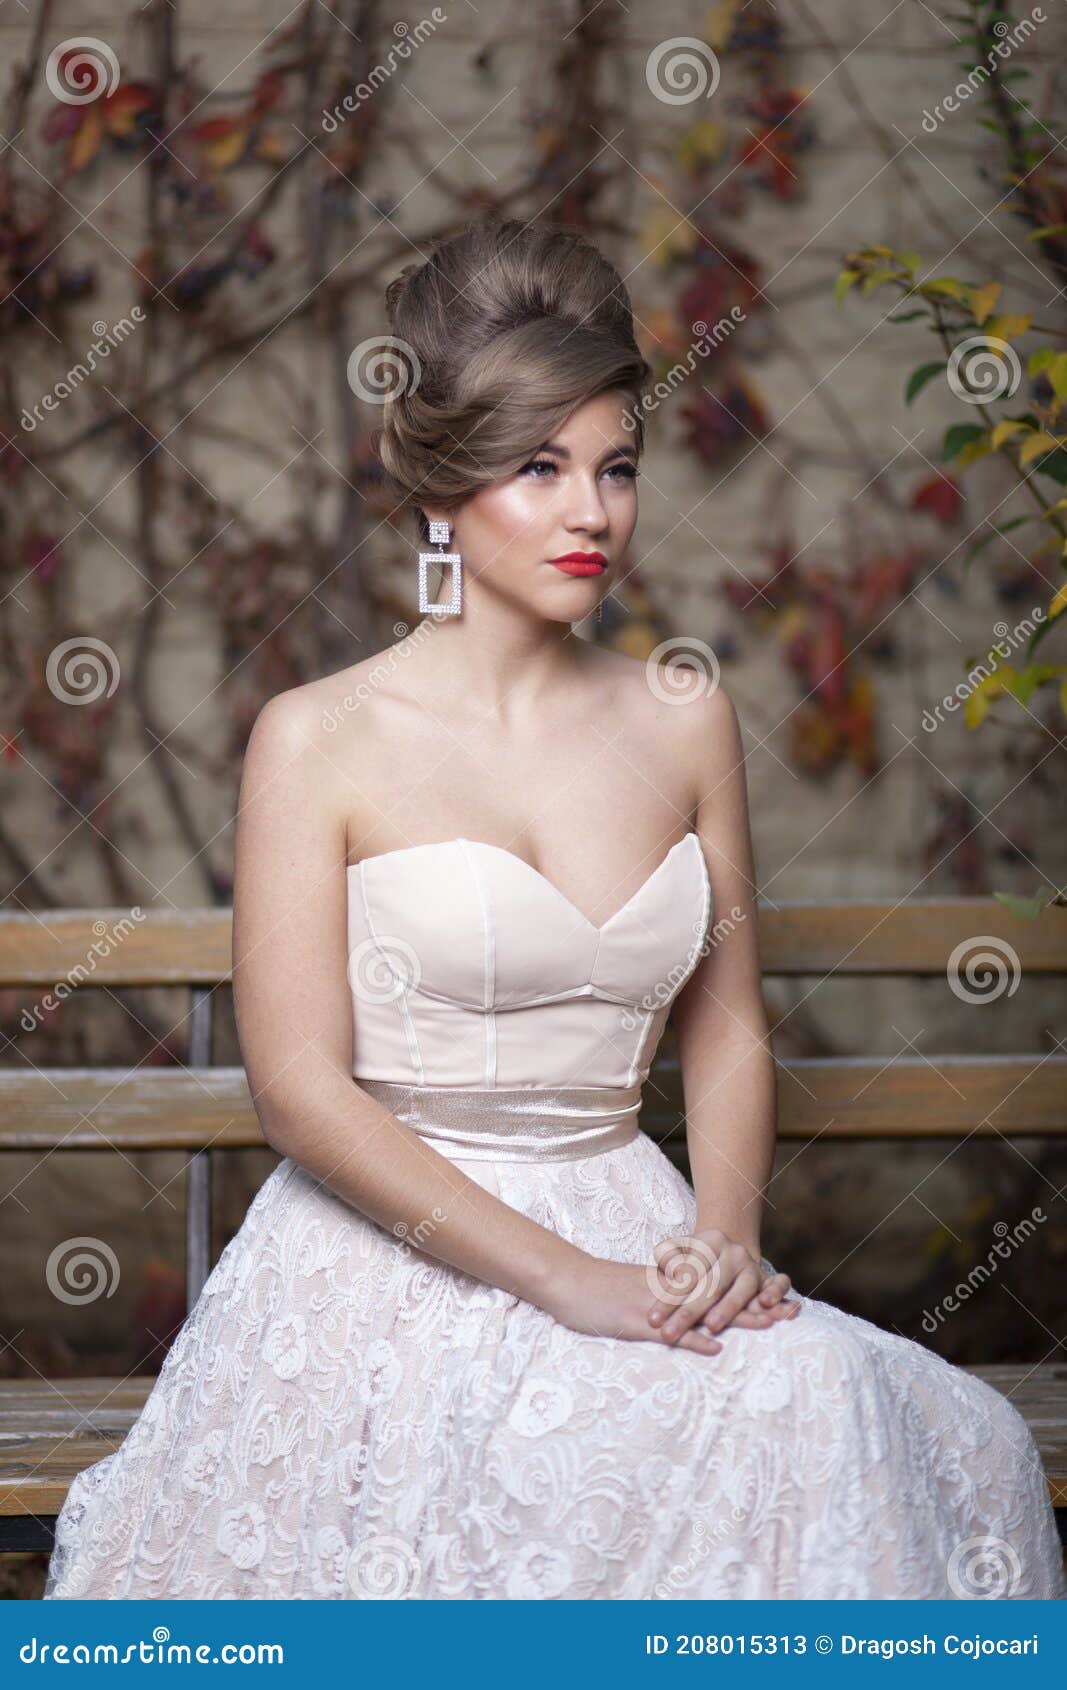 What kind of veil/hairstyle for a ball gown?